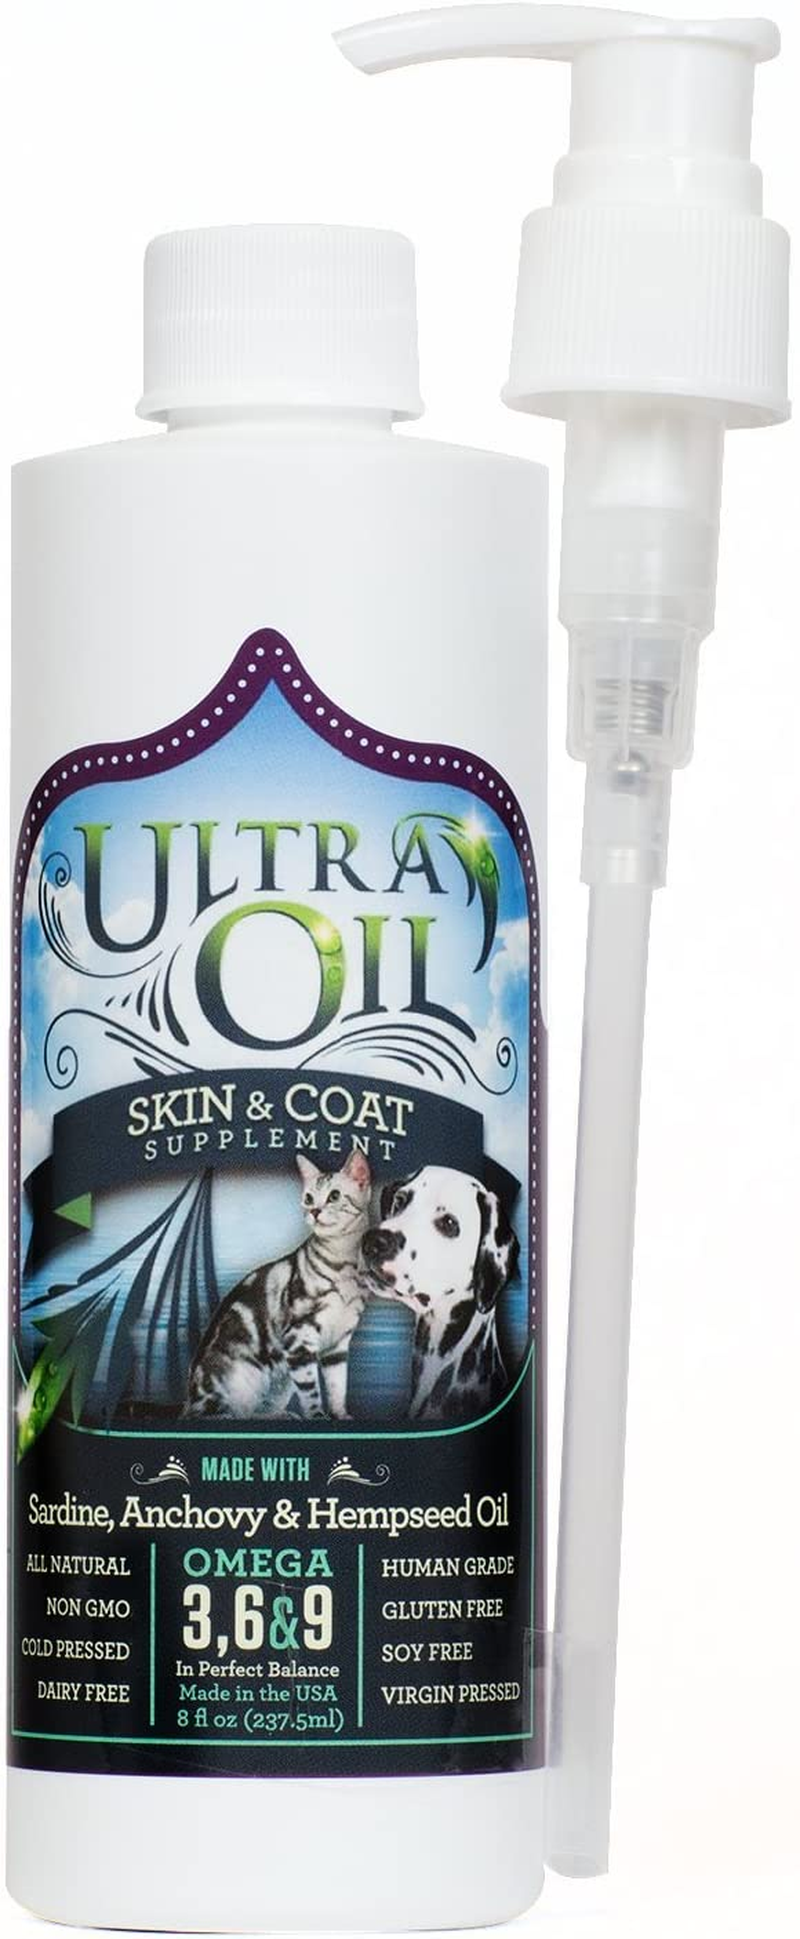 Ultra Oil Skin and Coat Supplement for Dogs & Cats - Hemp Seed Oil, Flaxseed Oil, Grape Seed Oil, Fish Oil for Relief from Dry Itchy Skin, Dandruff, and Allergies - 8 Ounce - Packaging May Vary